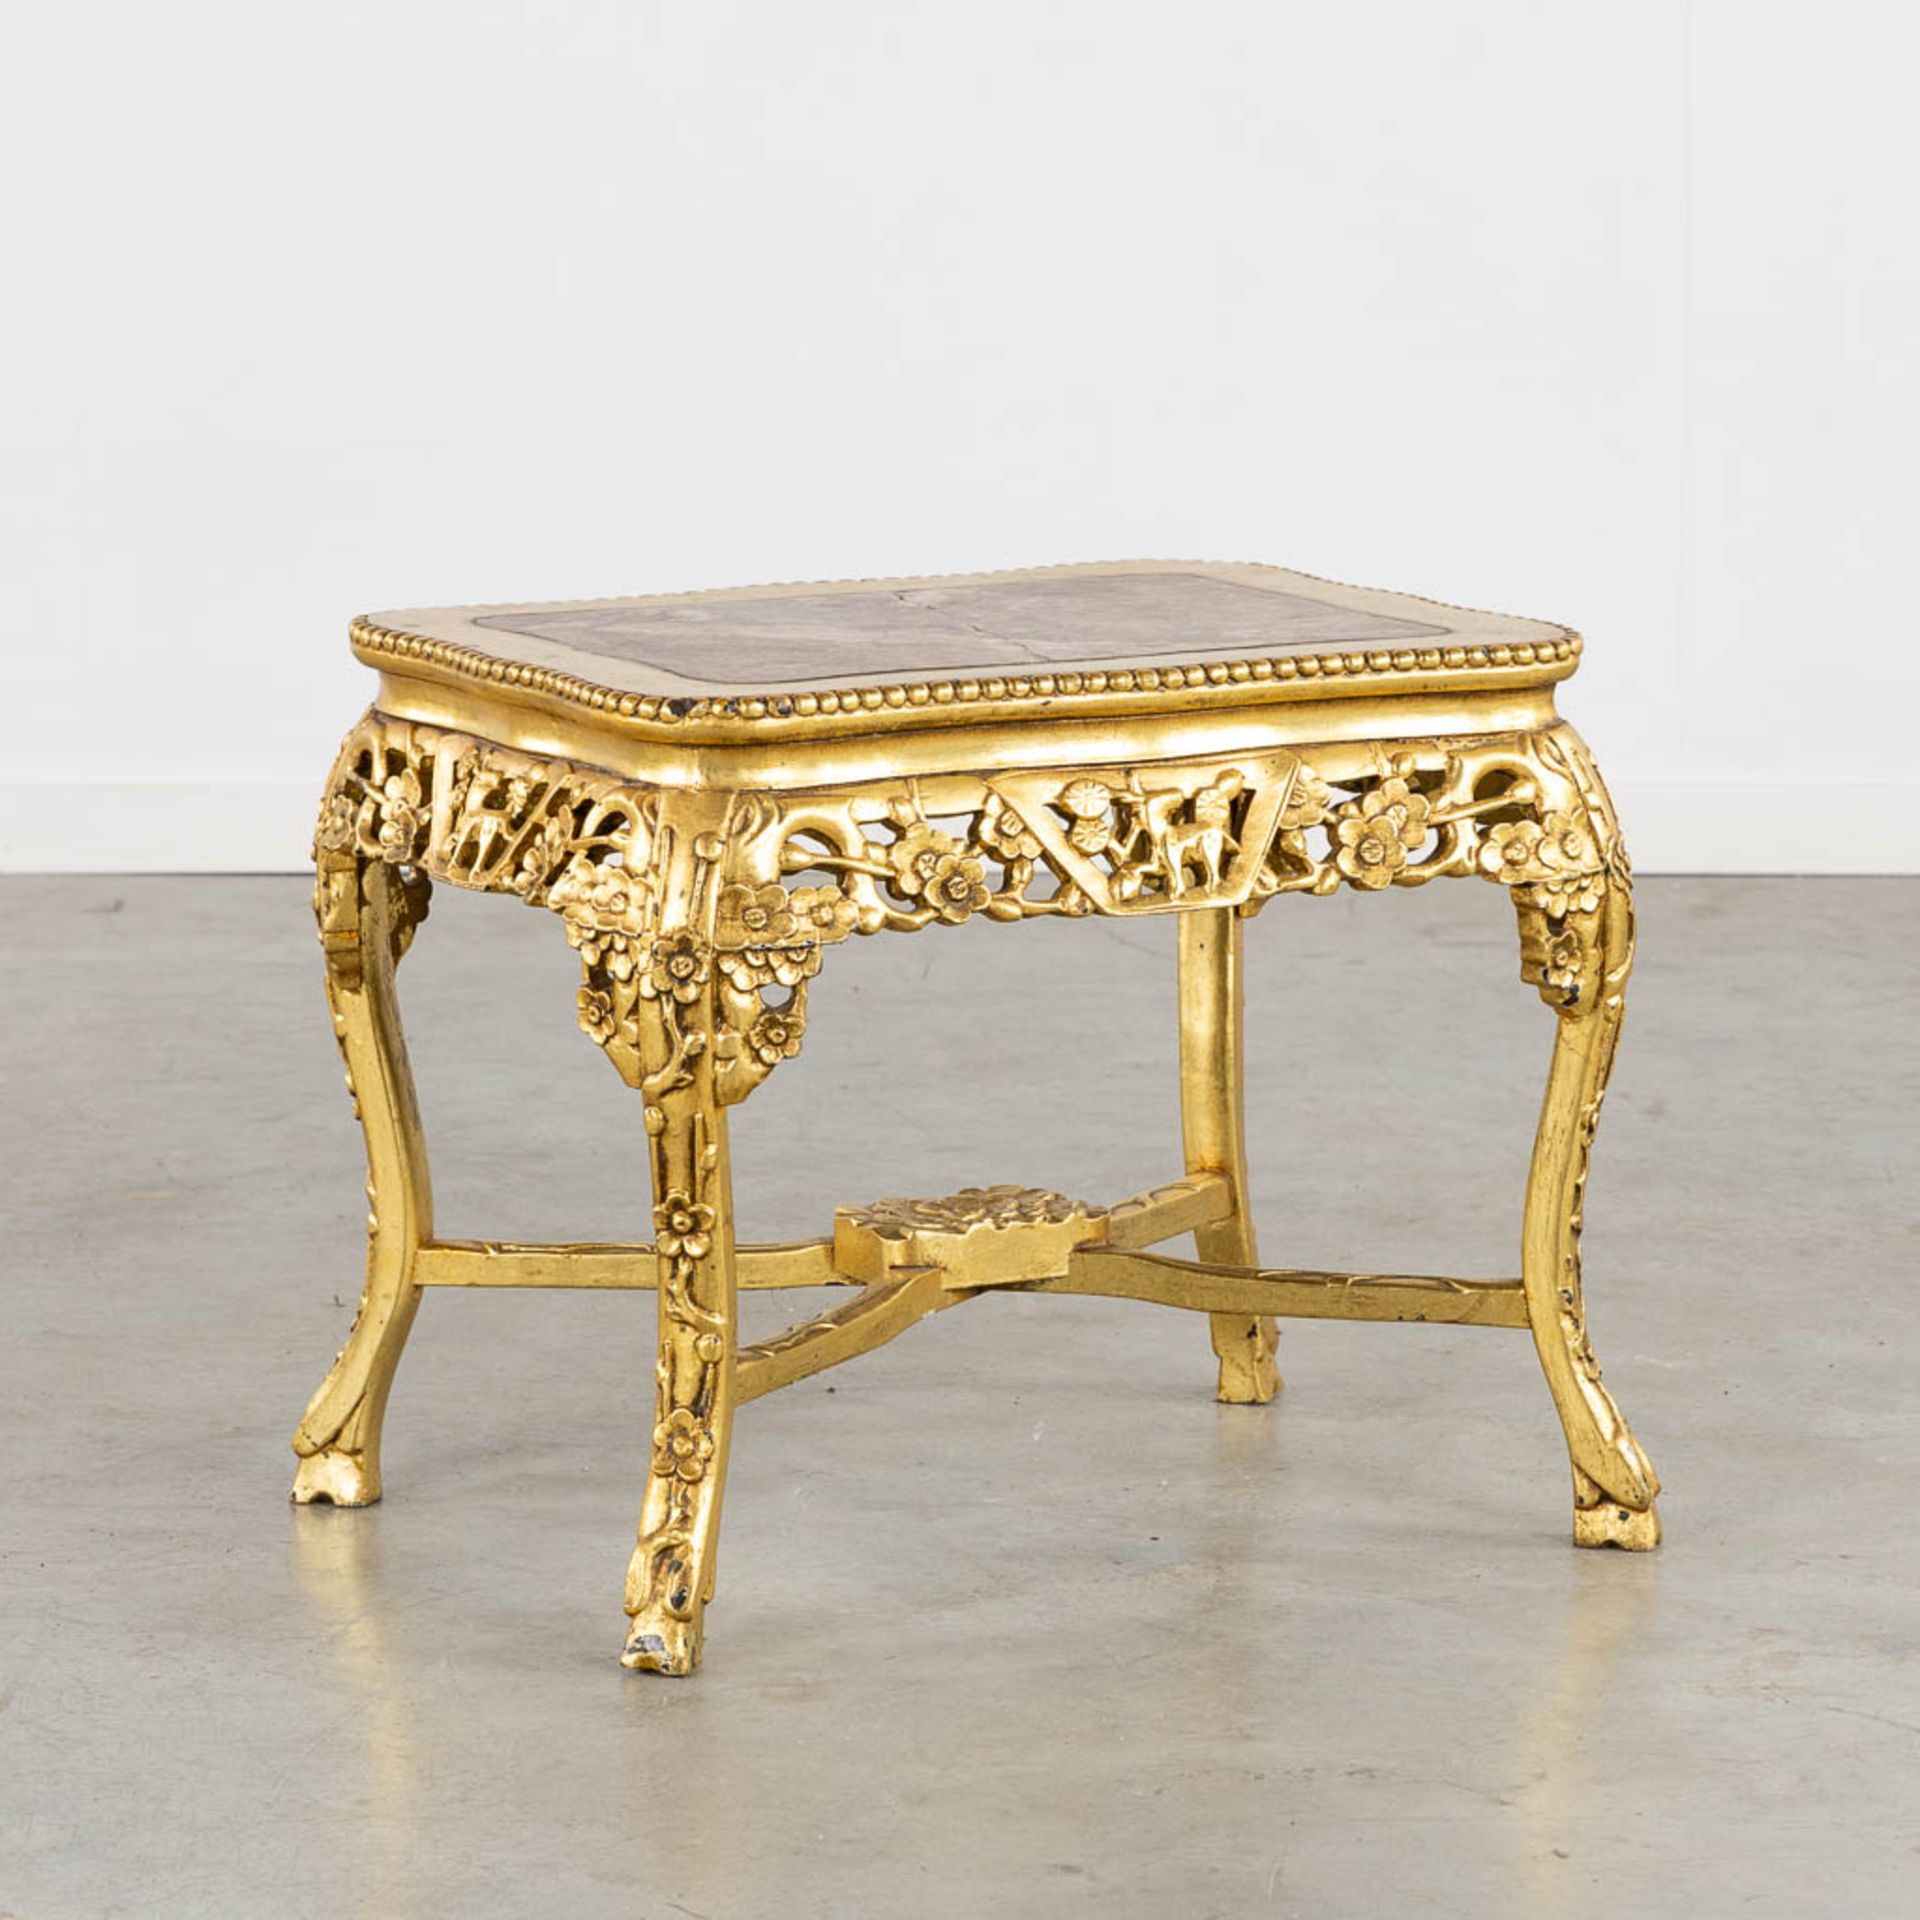 An oriental style side table, gilt wood with a marble top. (L:46 x W:52 x H:48 cm)